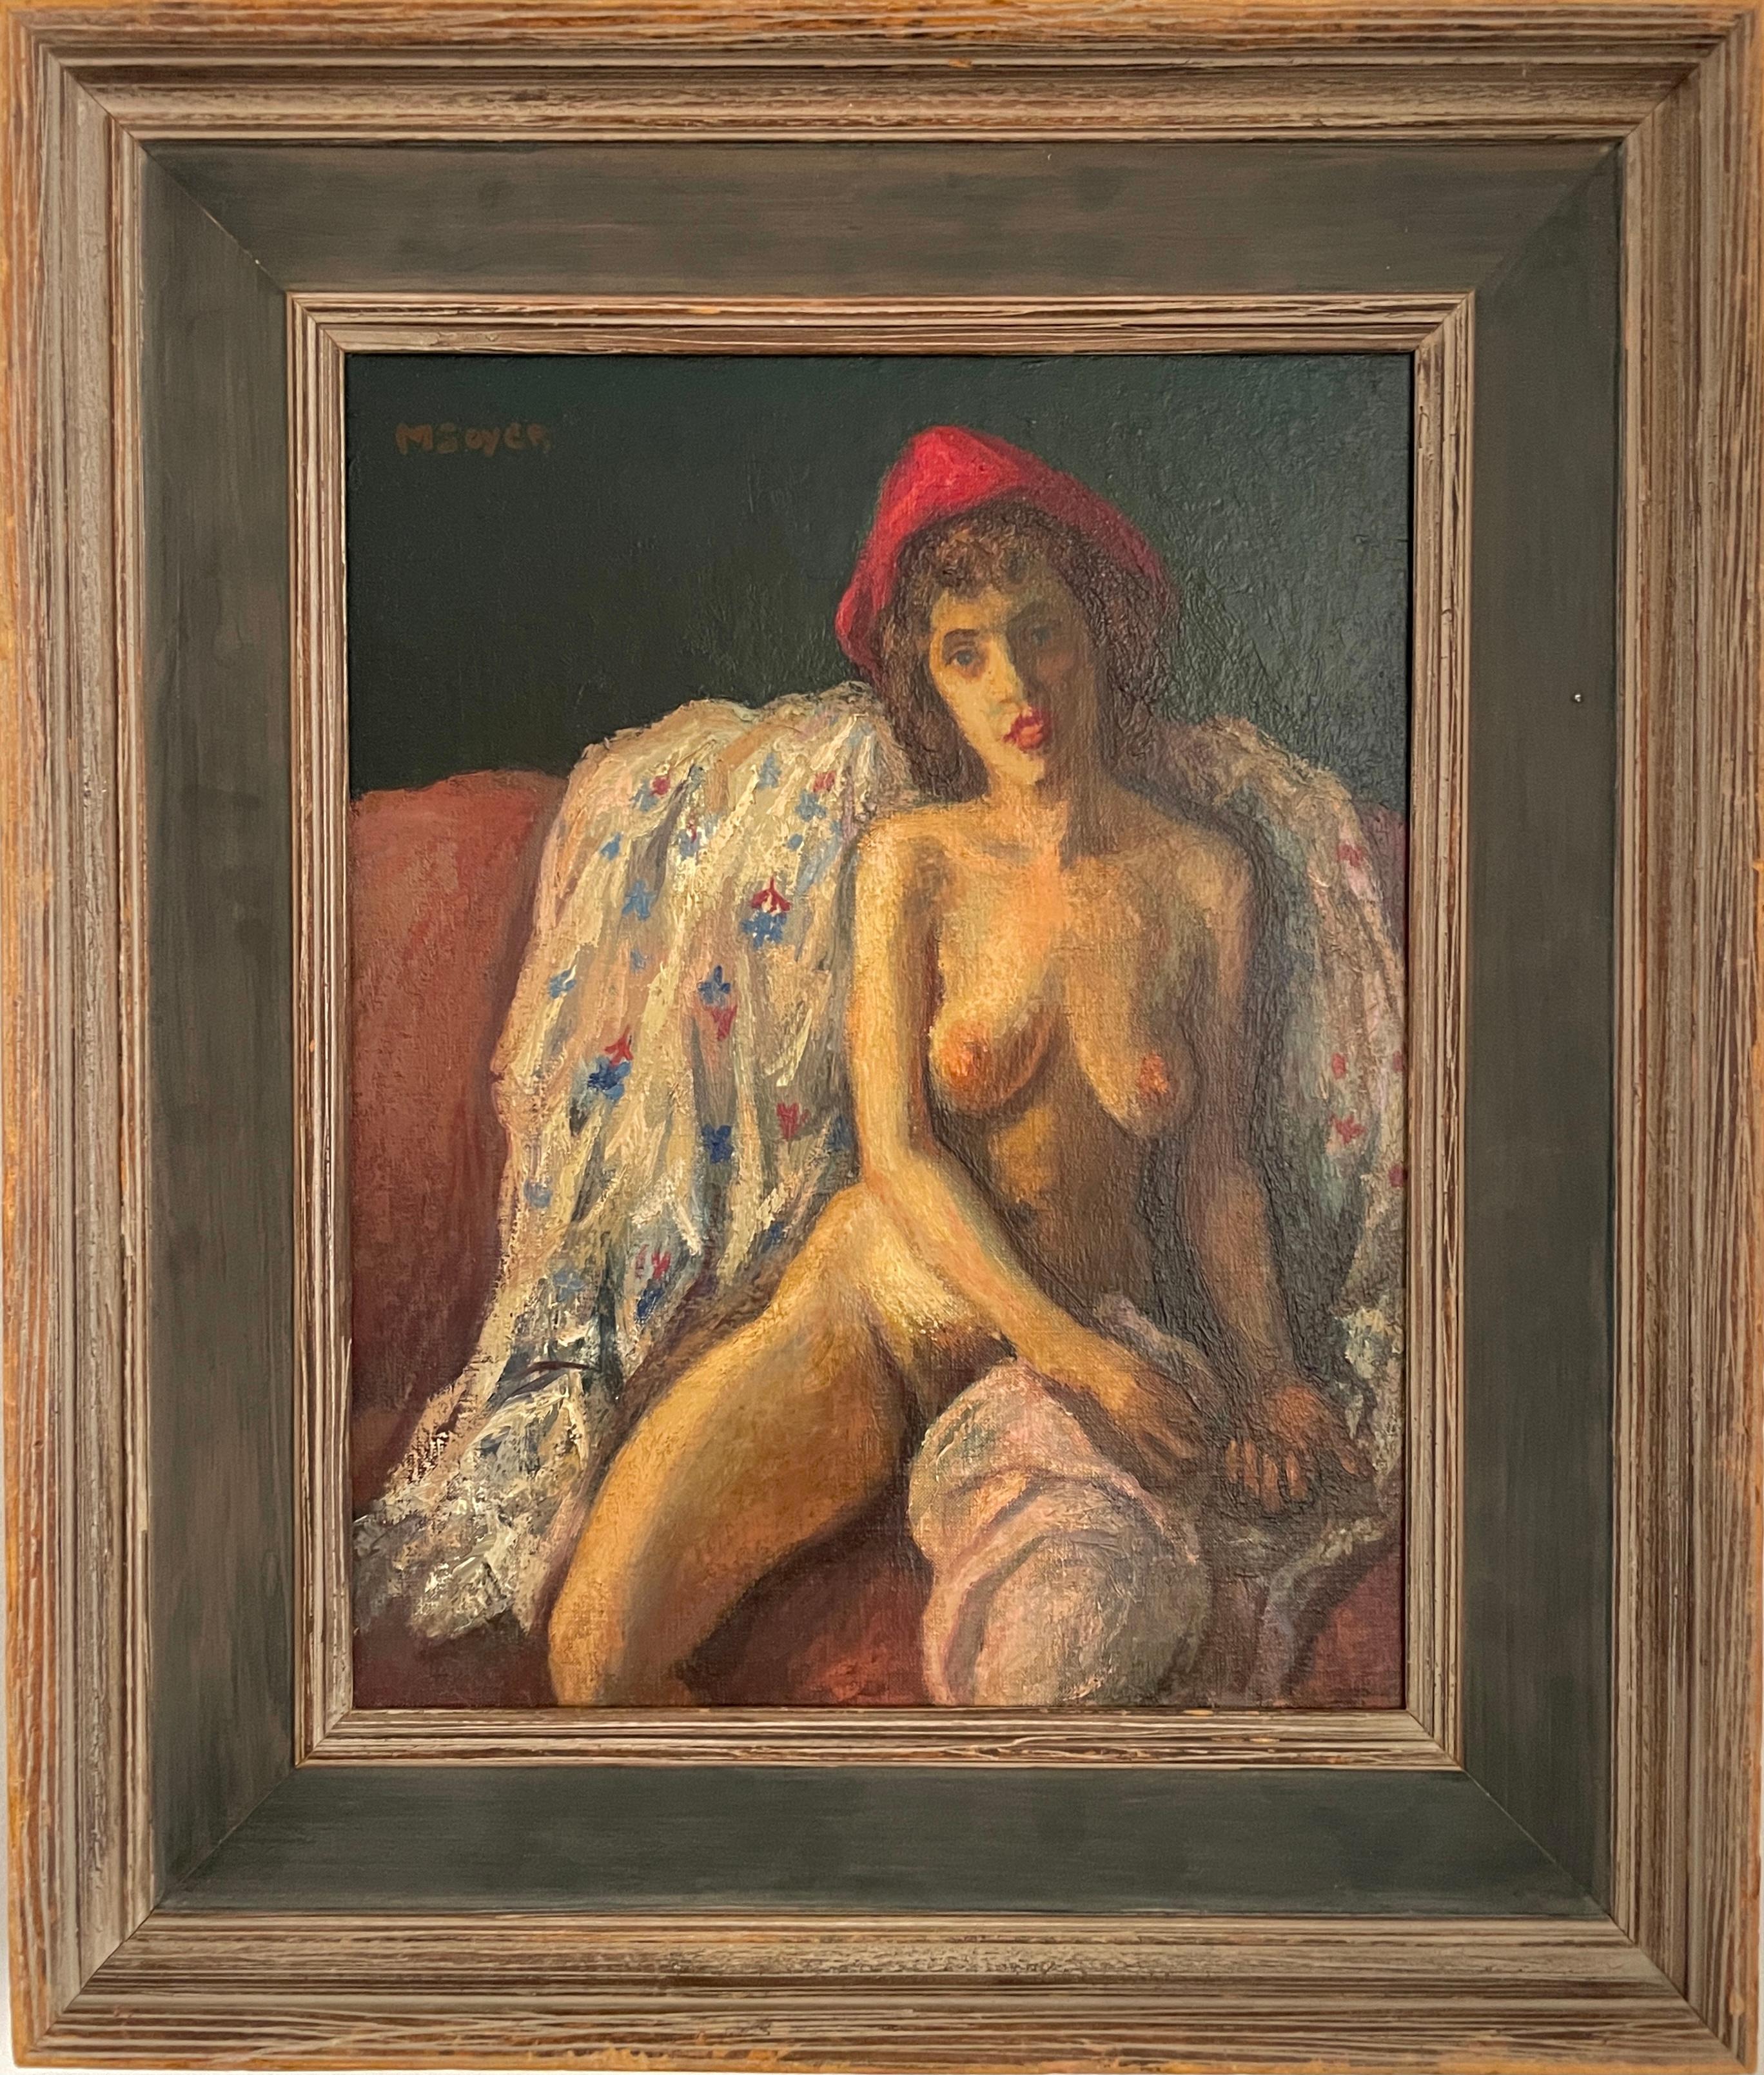 Realist oil painting by Moses Soyer. The artist was often quoted as saying, "My message is people." He was always looking to find who the person within was. 

Soyer and his brothers Raphael and Isaac were all successful artists. Moses Soyer began